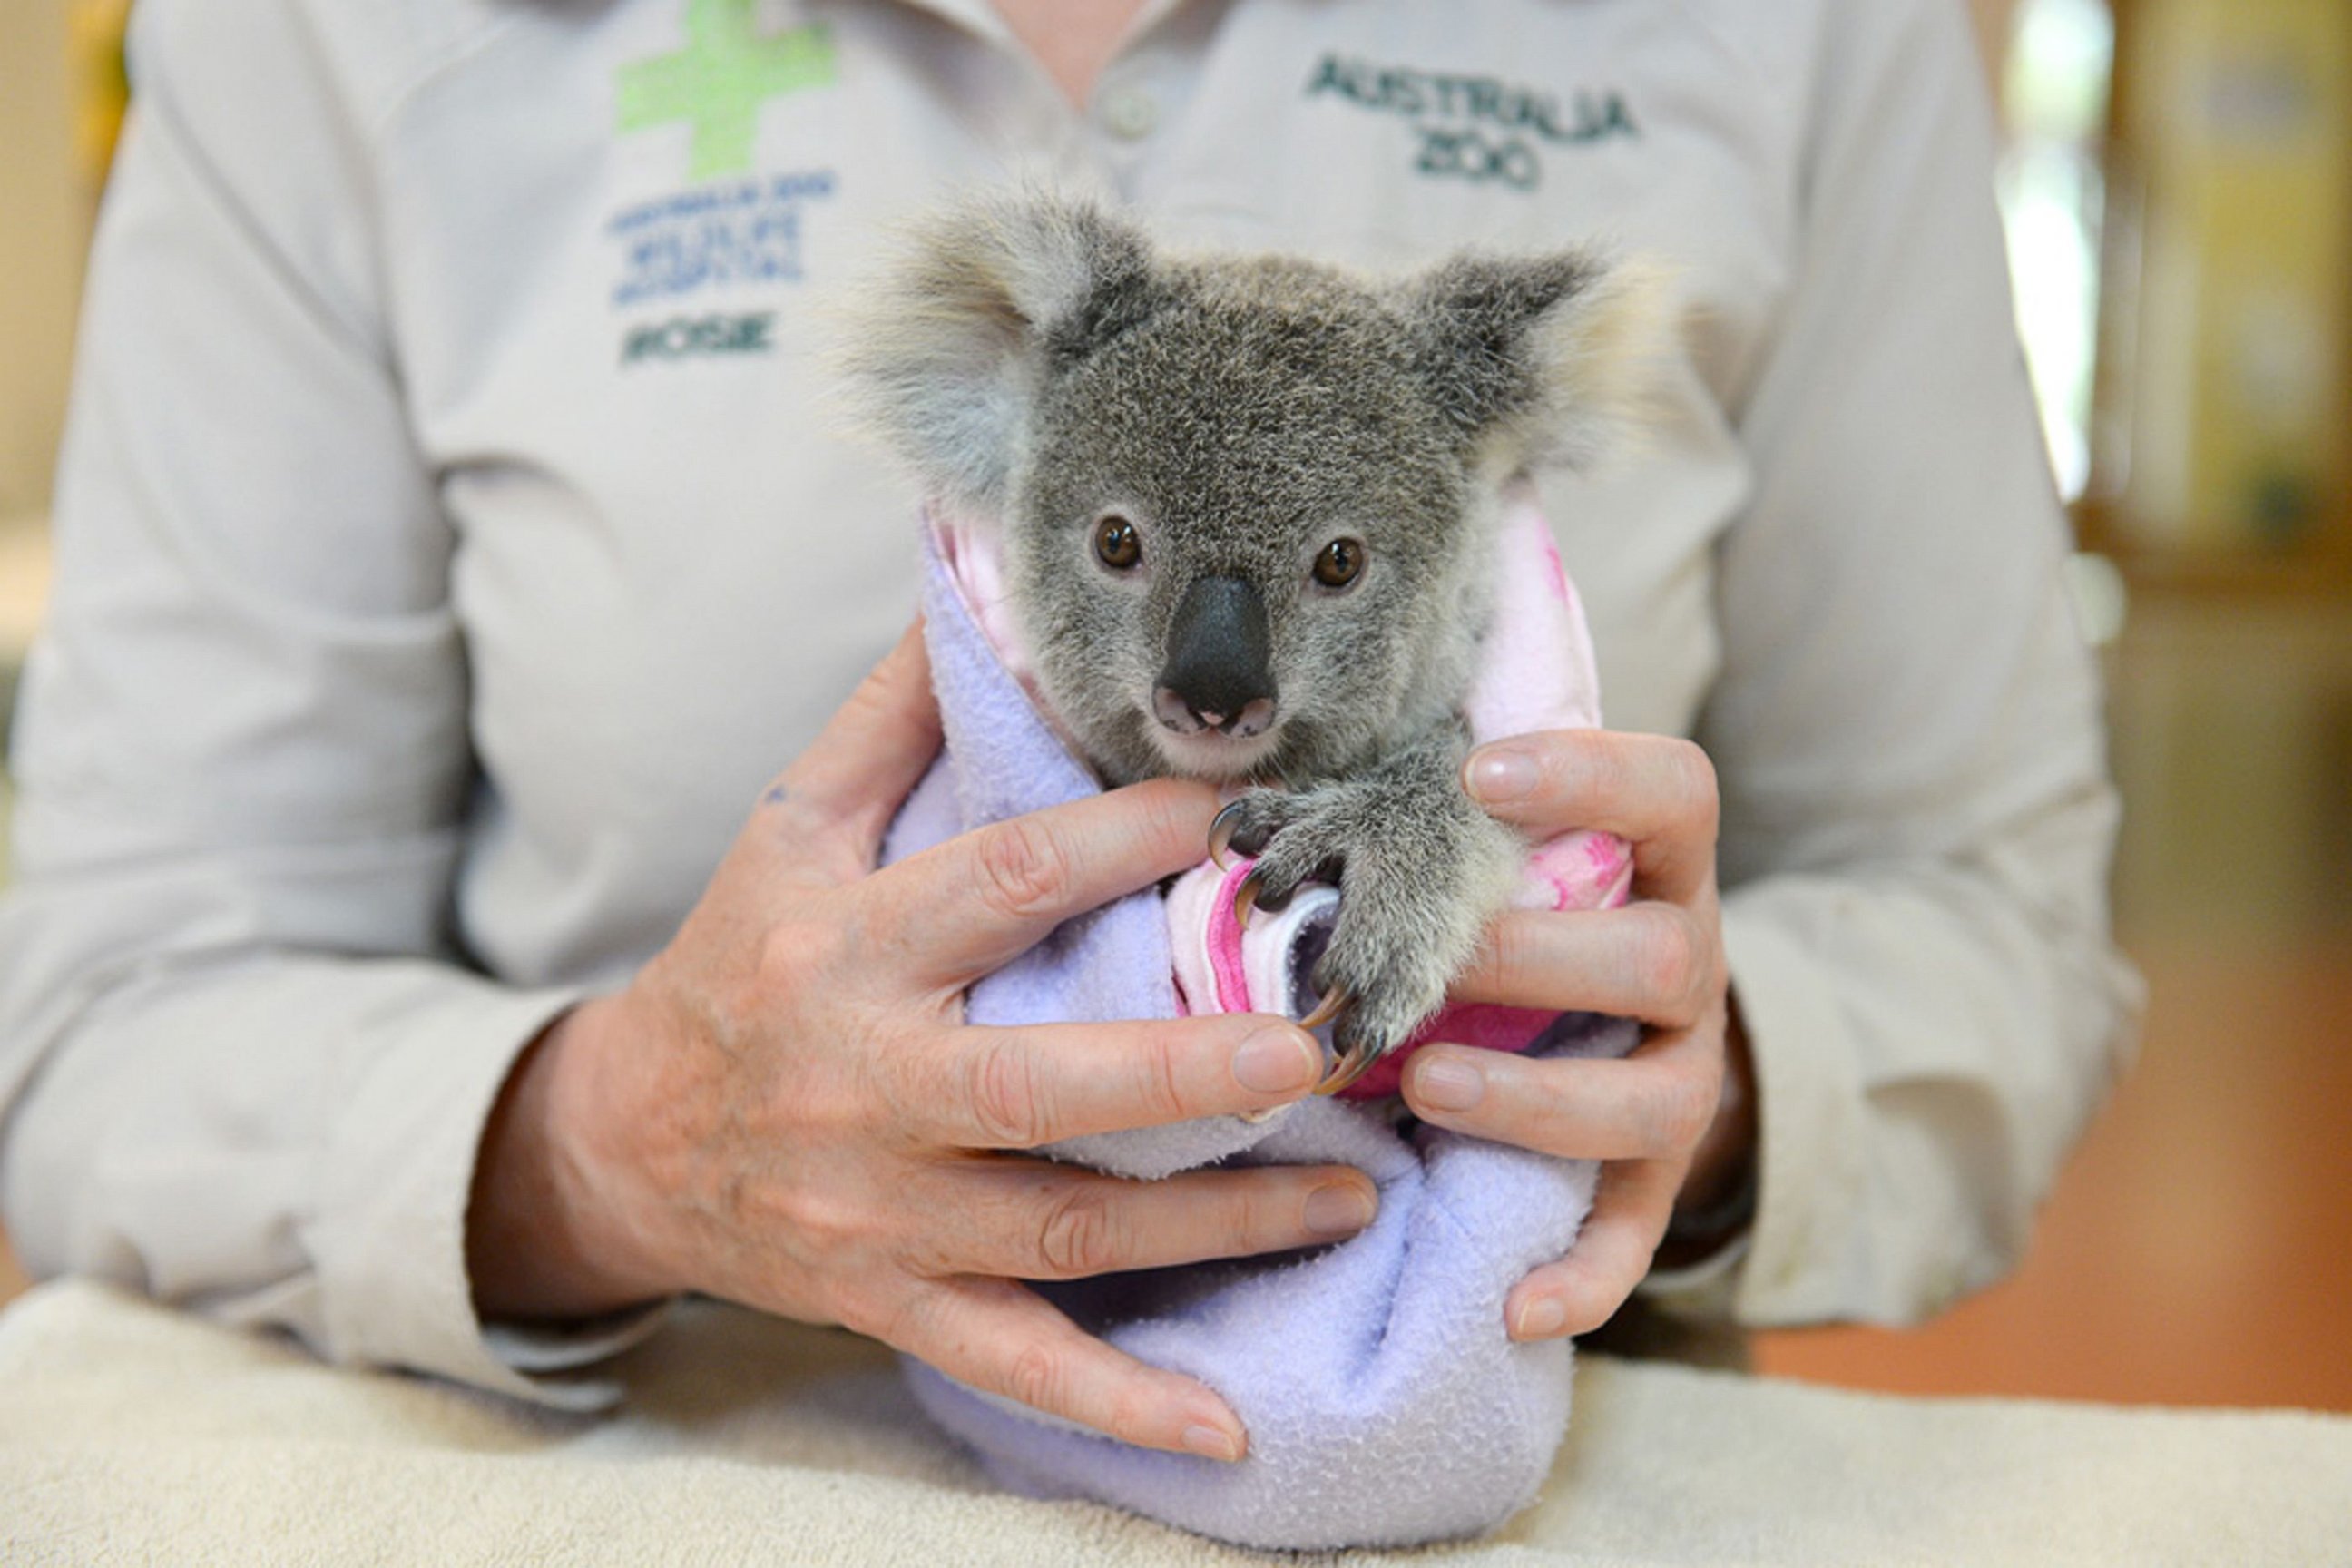 PHOTO: This undated handout photo received from the Australia Zoo on Sept. 19, 2016, shows Shayne, a nine-month-old orphaned baby koala who has found solace cuddling a fluffy toy koala in the absence of his dead mum.